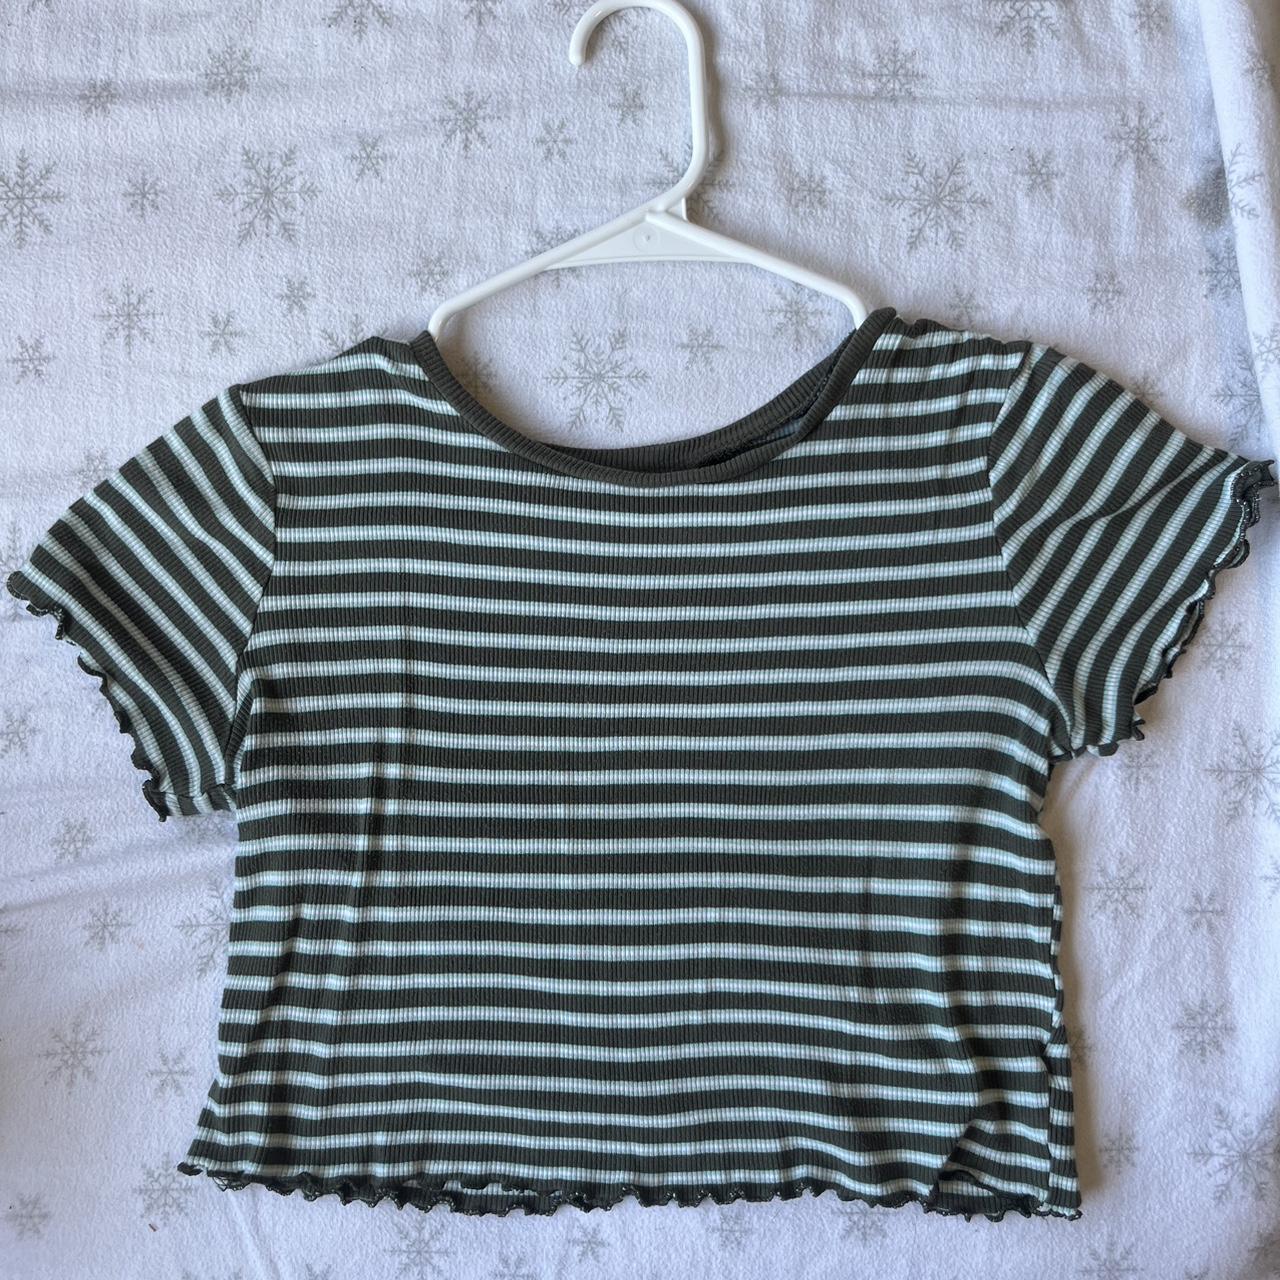 Wild fable crop top. Green, blue and white from target - Depop